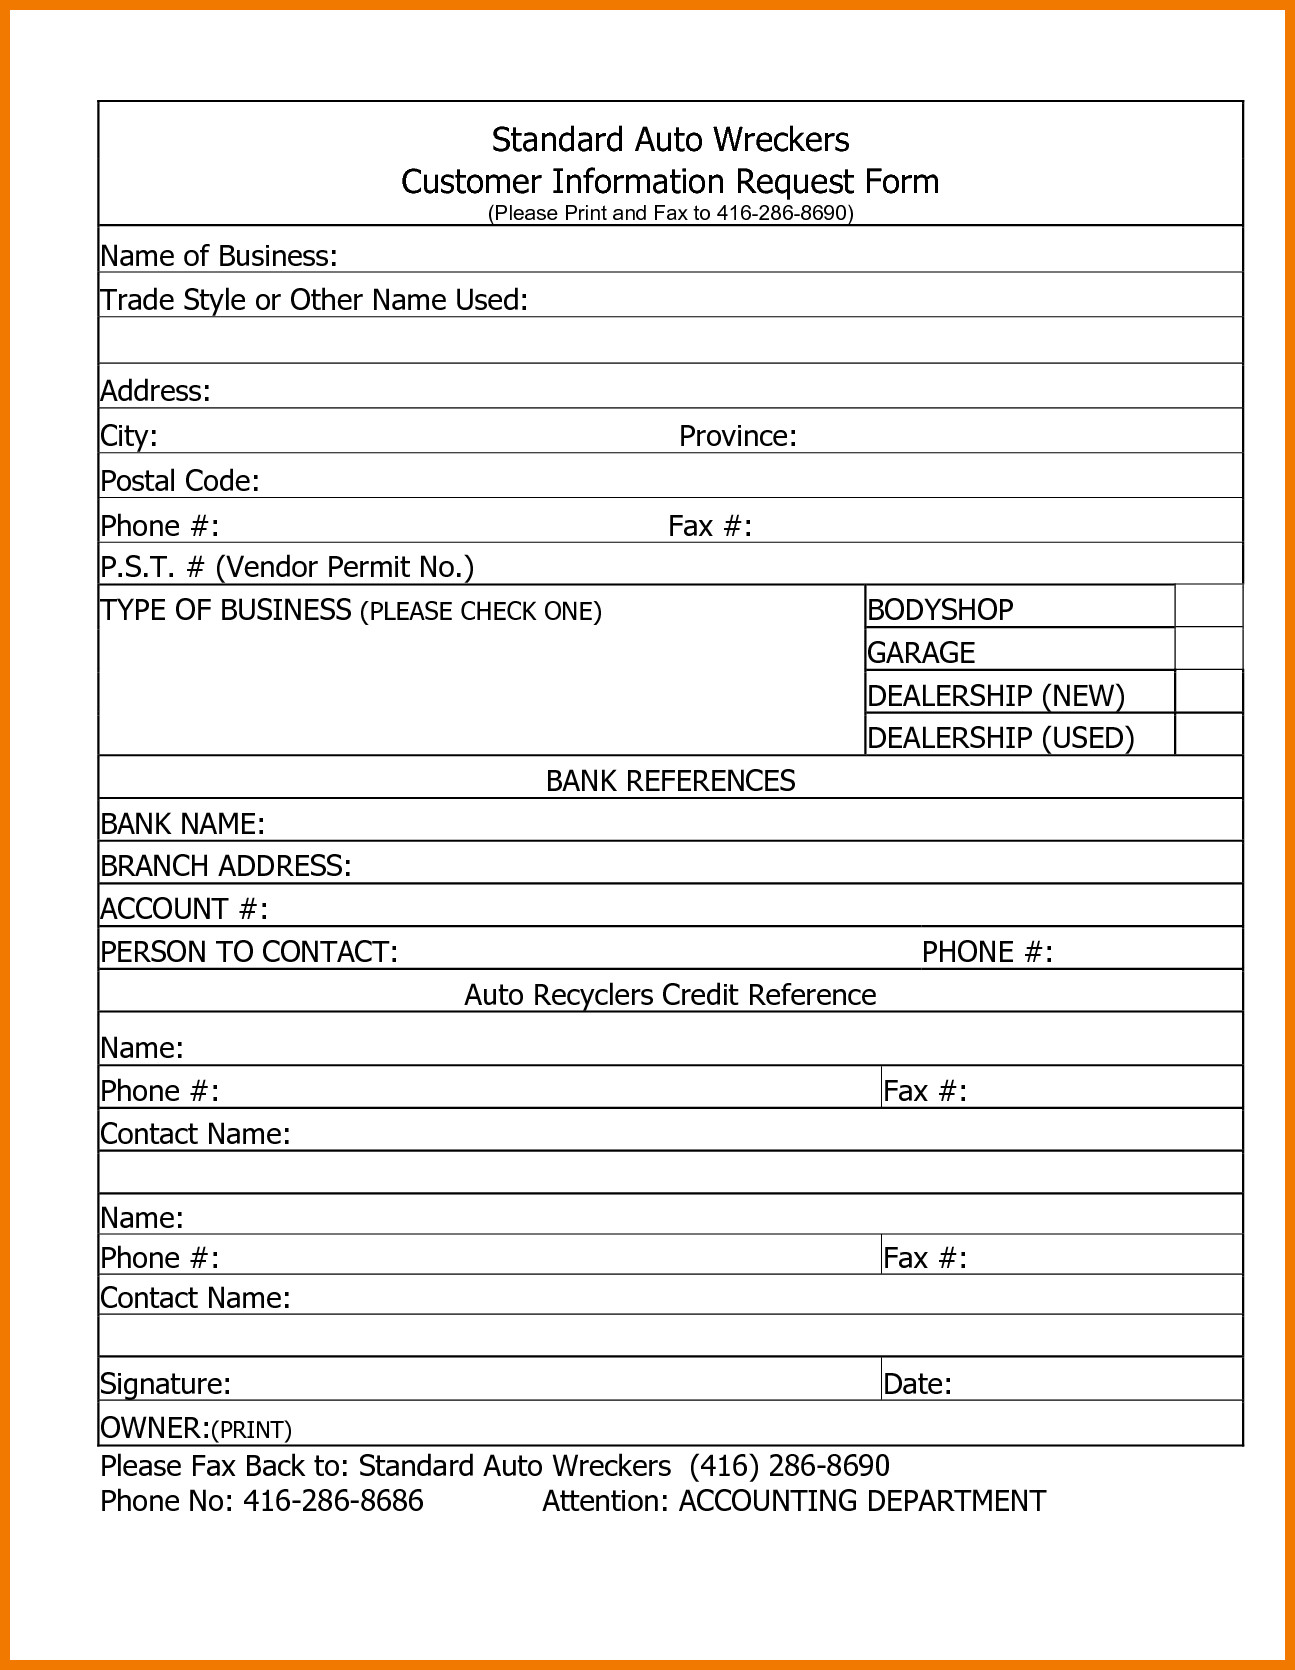 Customer Information form Template 020 New Customer Information form Template